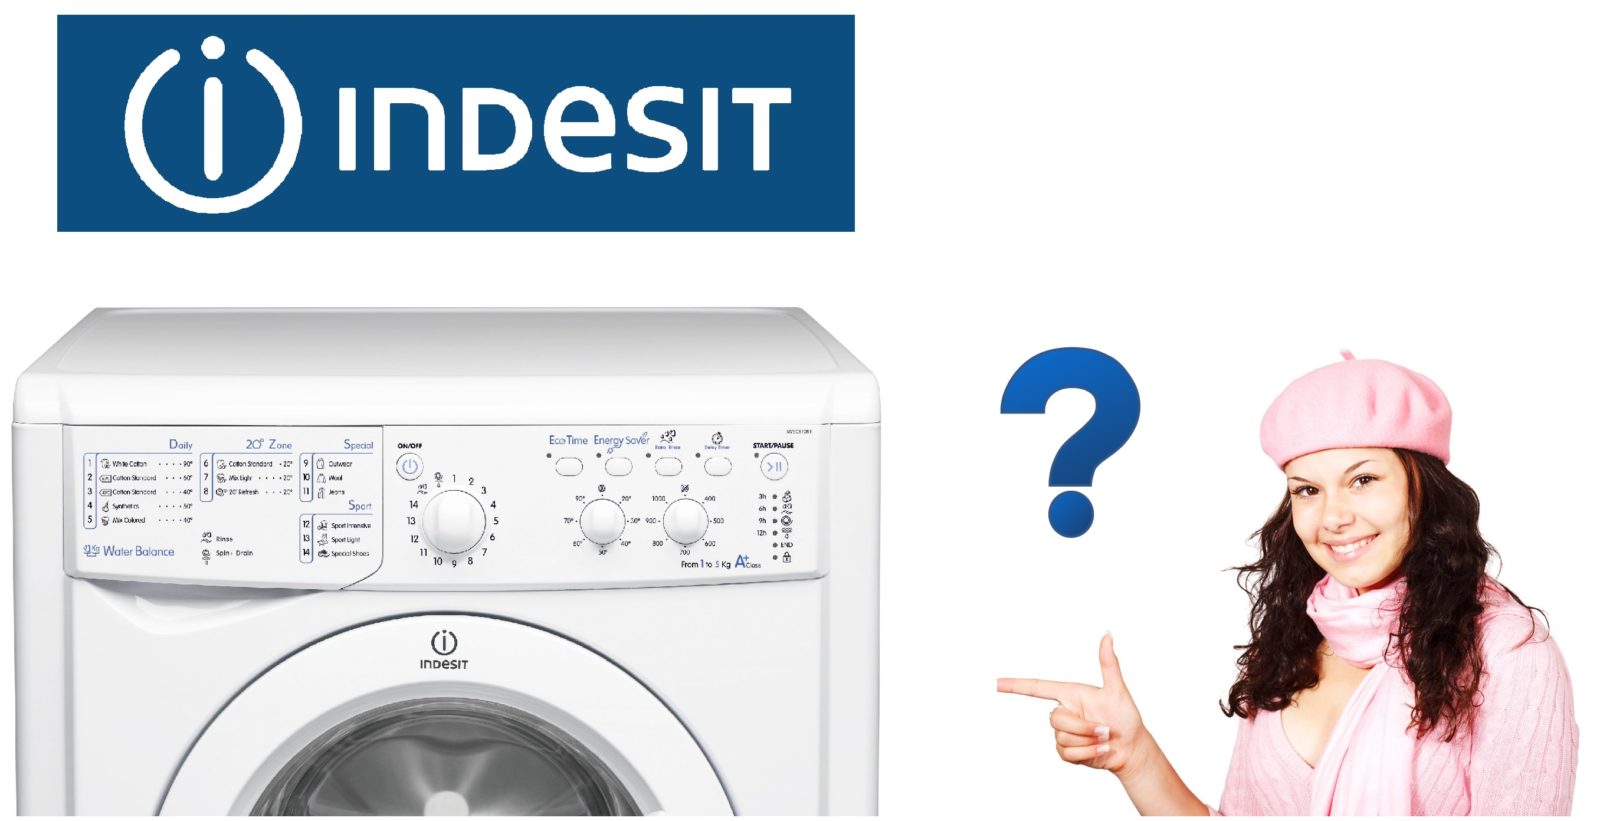 How to use an Indesit washing machine